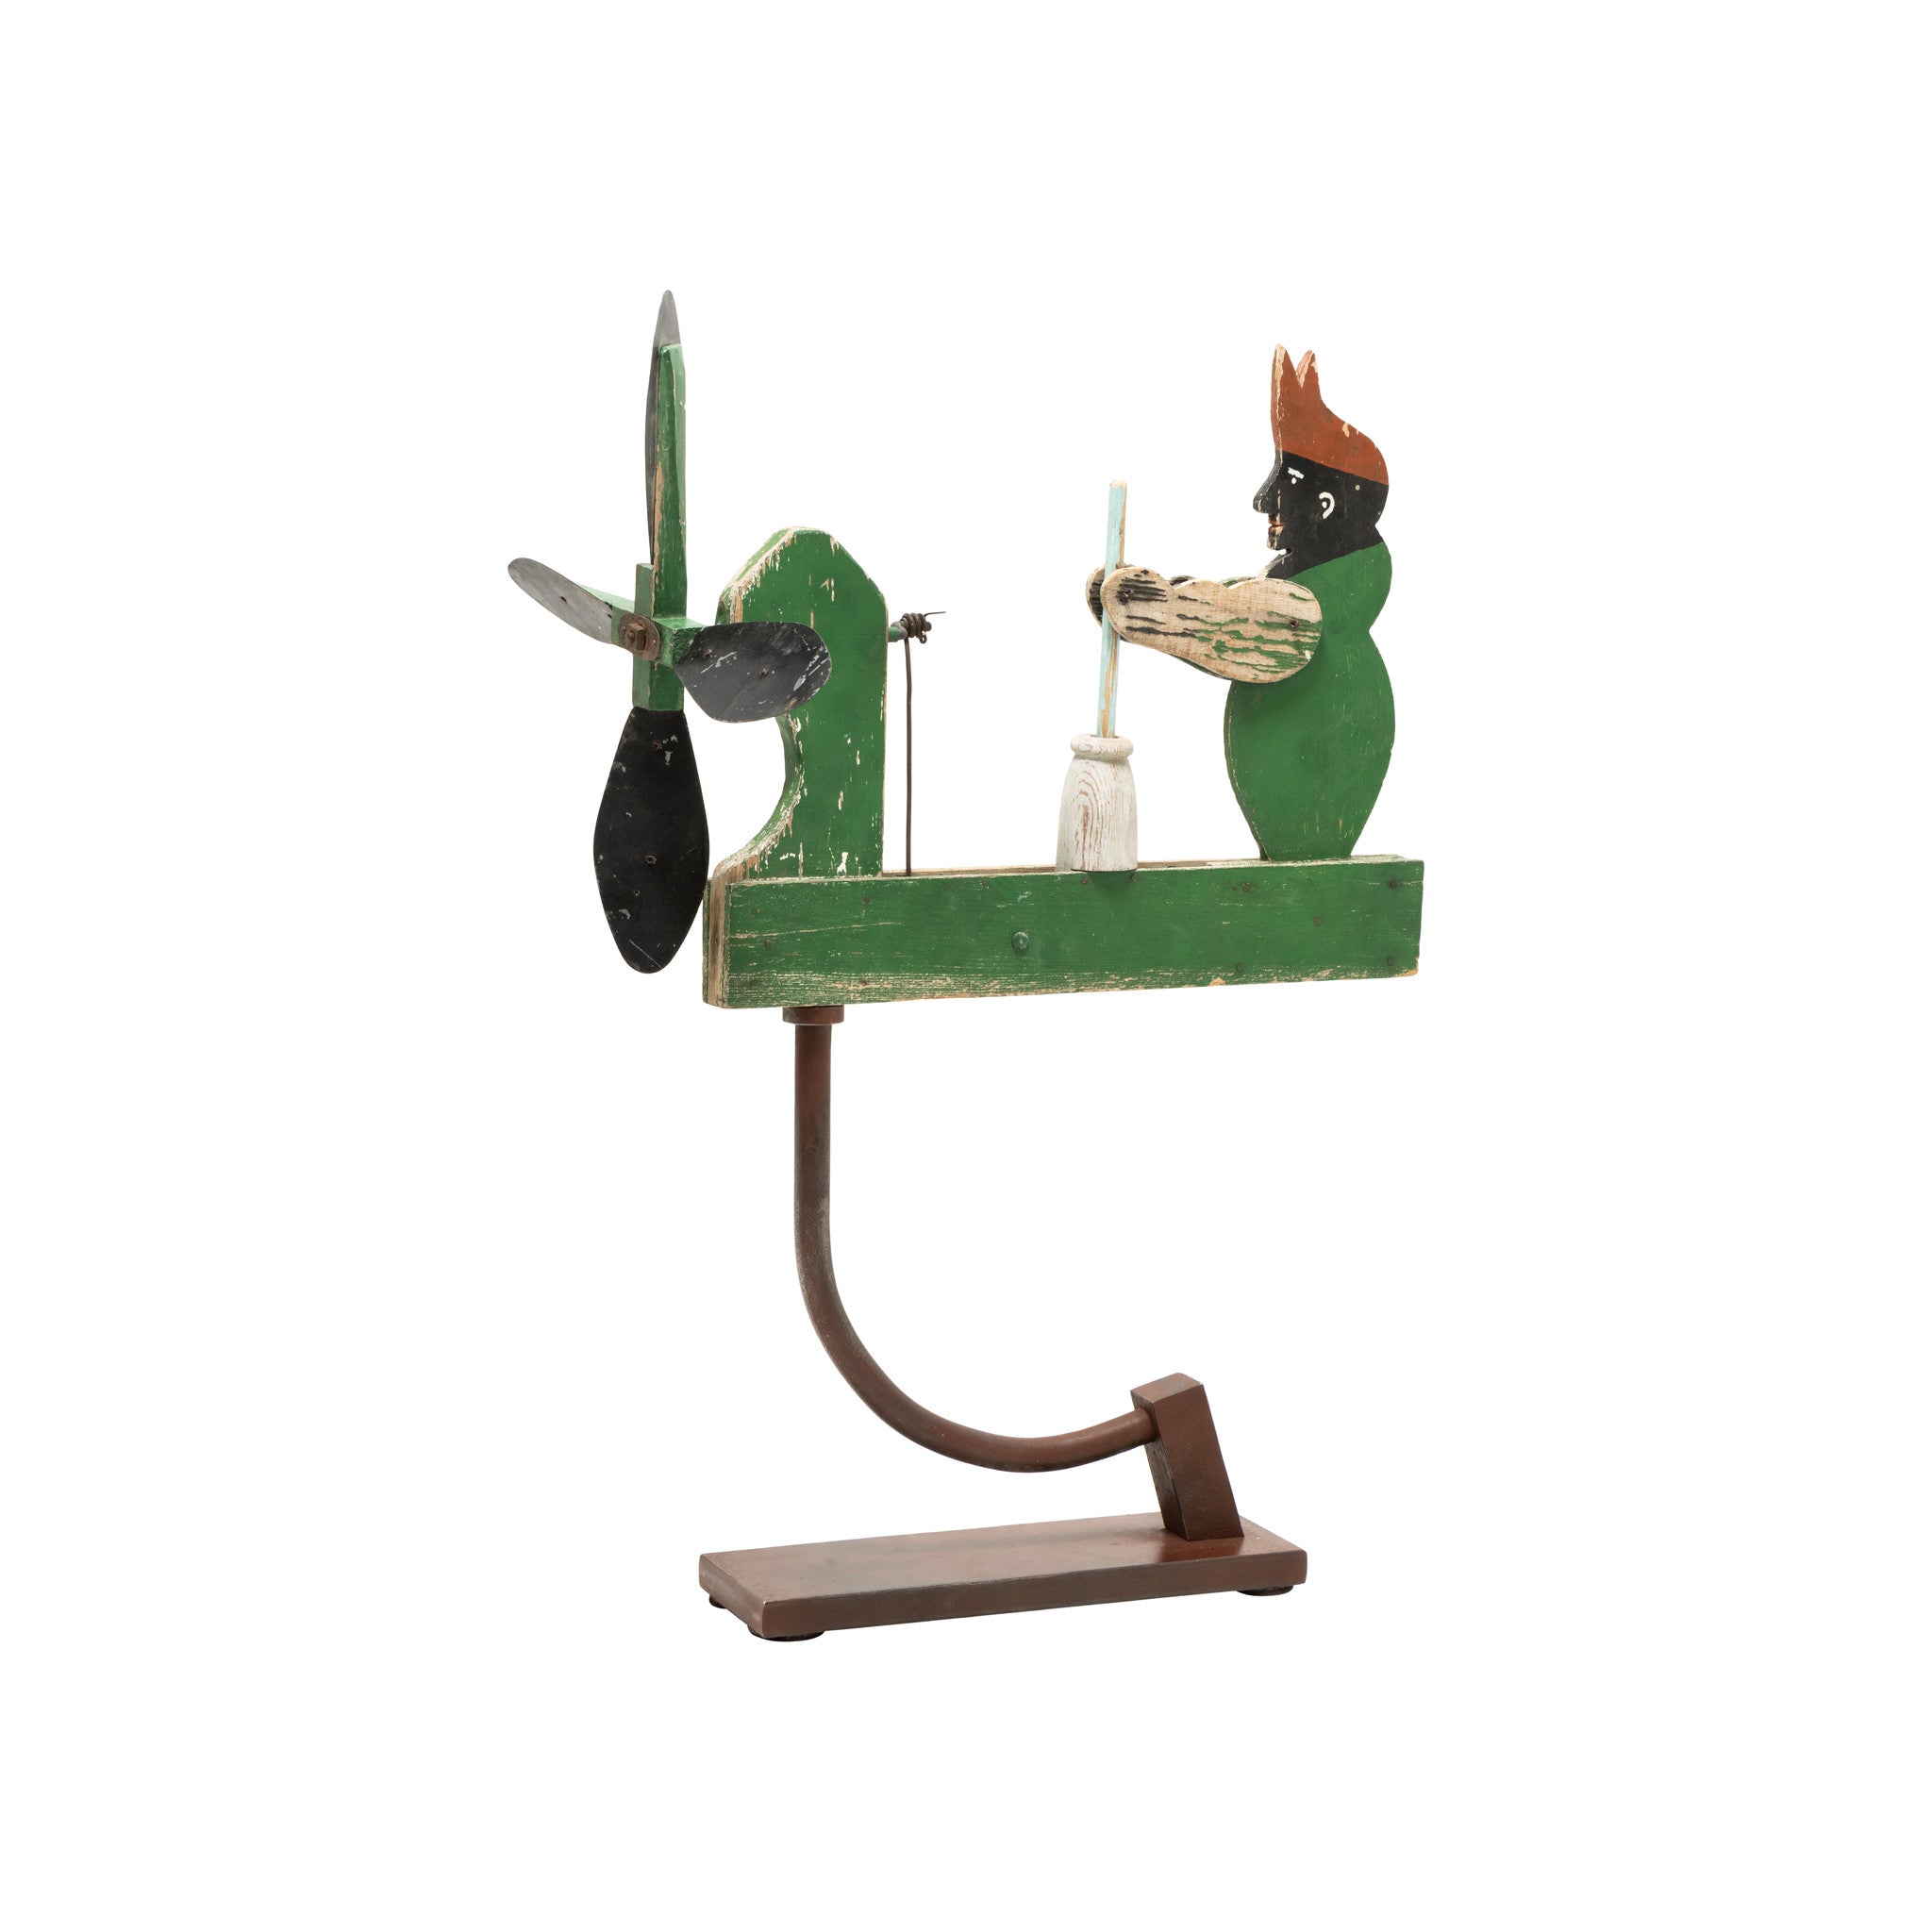 Whirligig with Butter Churner Figure